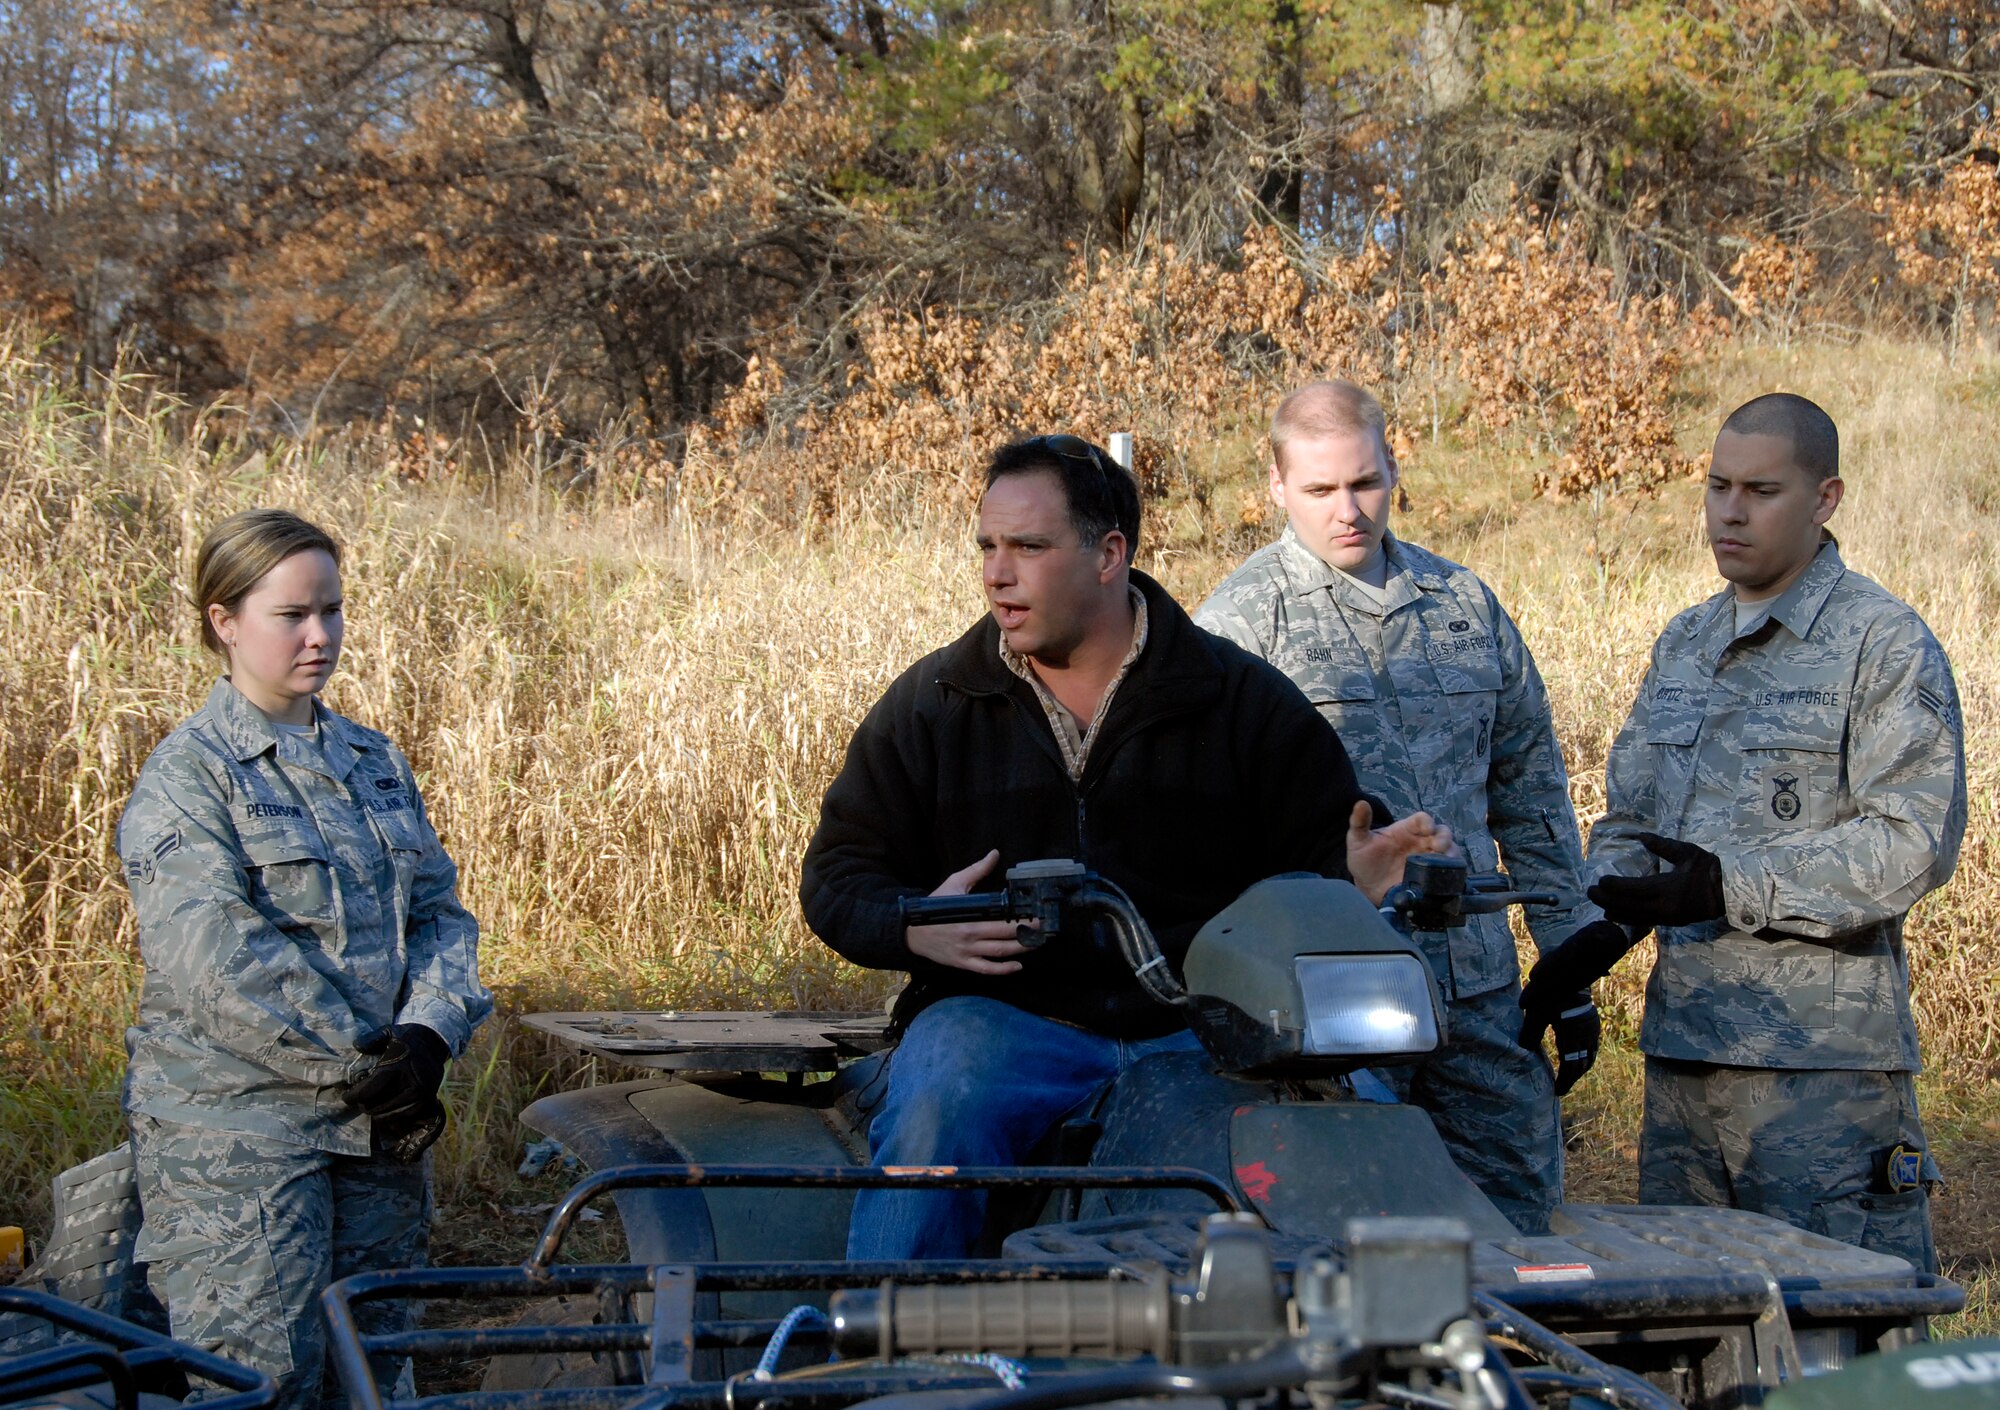 Tech. Sgt. Max Fortin, 115th Fighter Wing Security Forces member and certified All Terrain Vehicle Instructor, explains how to operate an A.T.V to fellow 115th SF Airmen at Volk Field Combat Readiness Training Center Nov. 1, 2009.  115th Fighter Wing Security Forces members are required to know how to operate an A.T.V in various environments. (U.S. Air Force photo by Capt. Suzanne Vanderweyst)